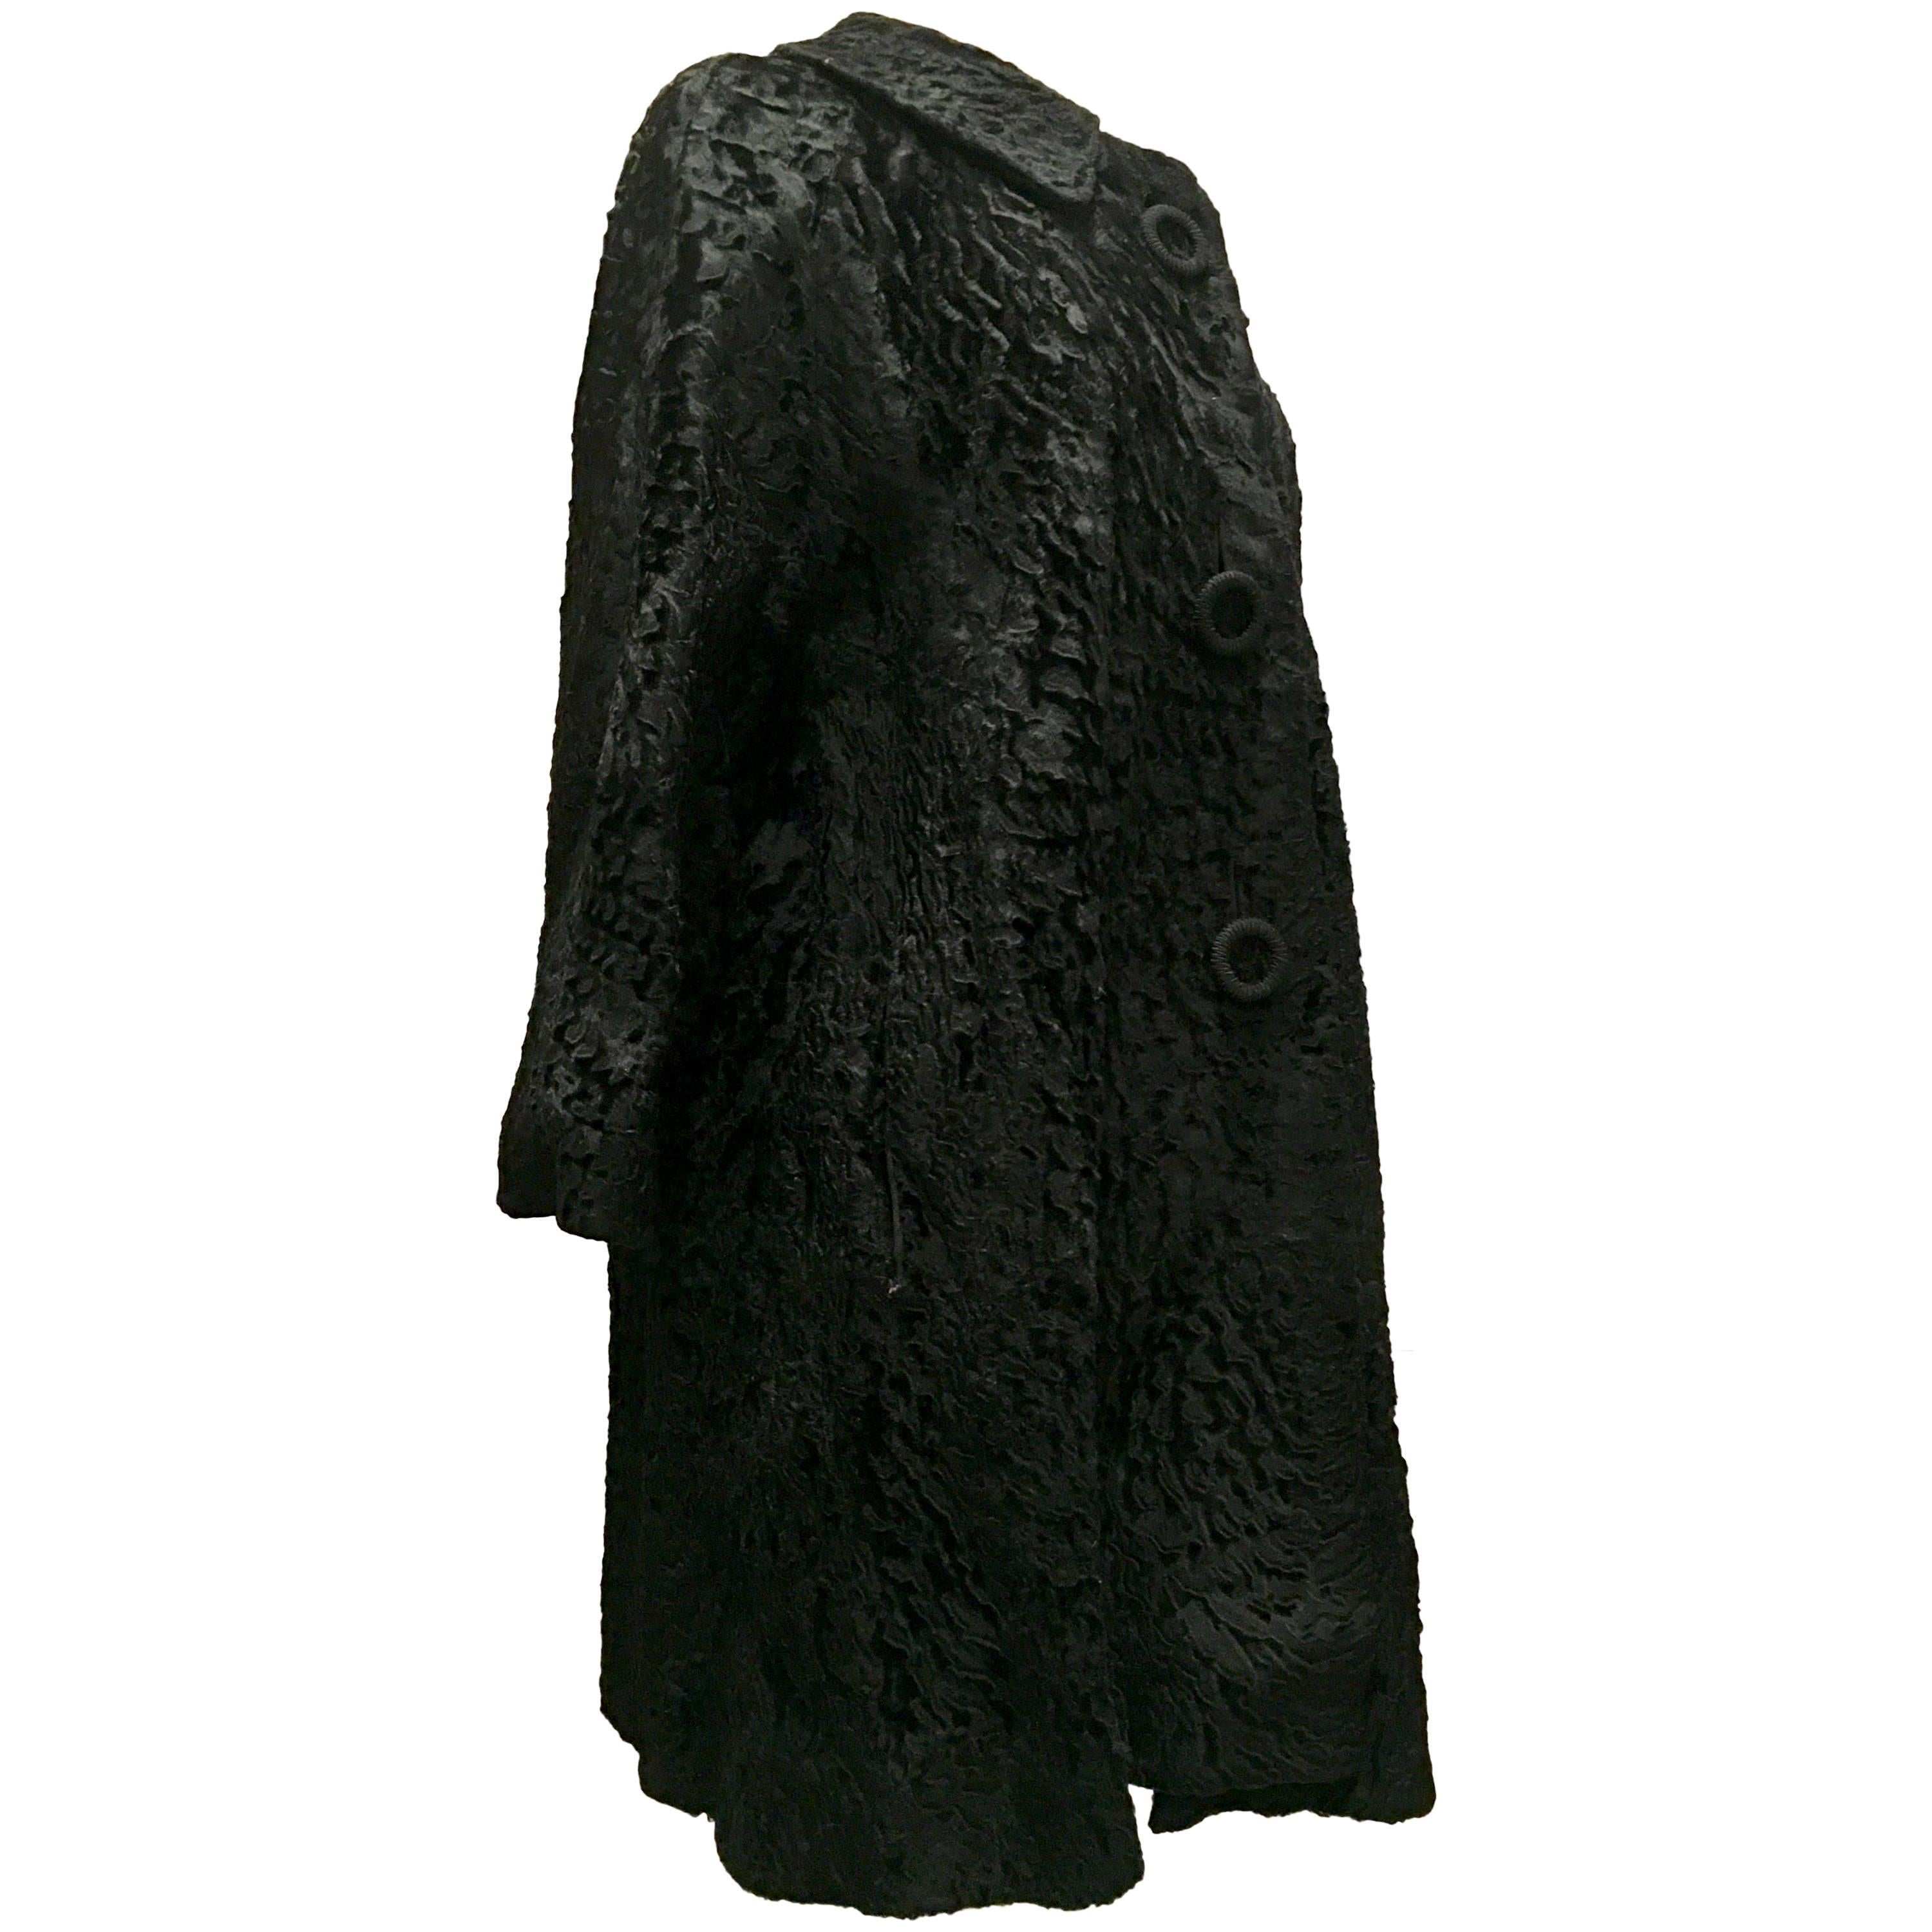 1960'S Black Persian Lamb Fur Swing Coat. Gorgeous jet black sculpted Persian lamb swing style car coat features, adorable oversized made of lamb buttons, Peter Pan Collar, three quarter inch bell sleeves,  two exterior side pockets. Fully lined